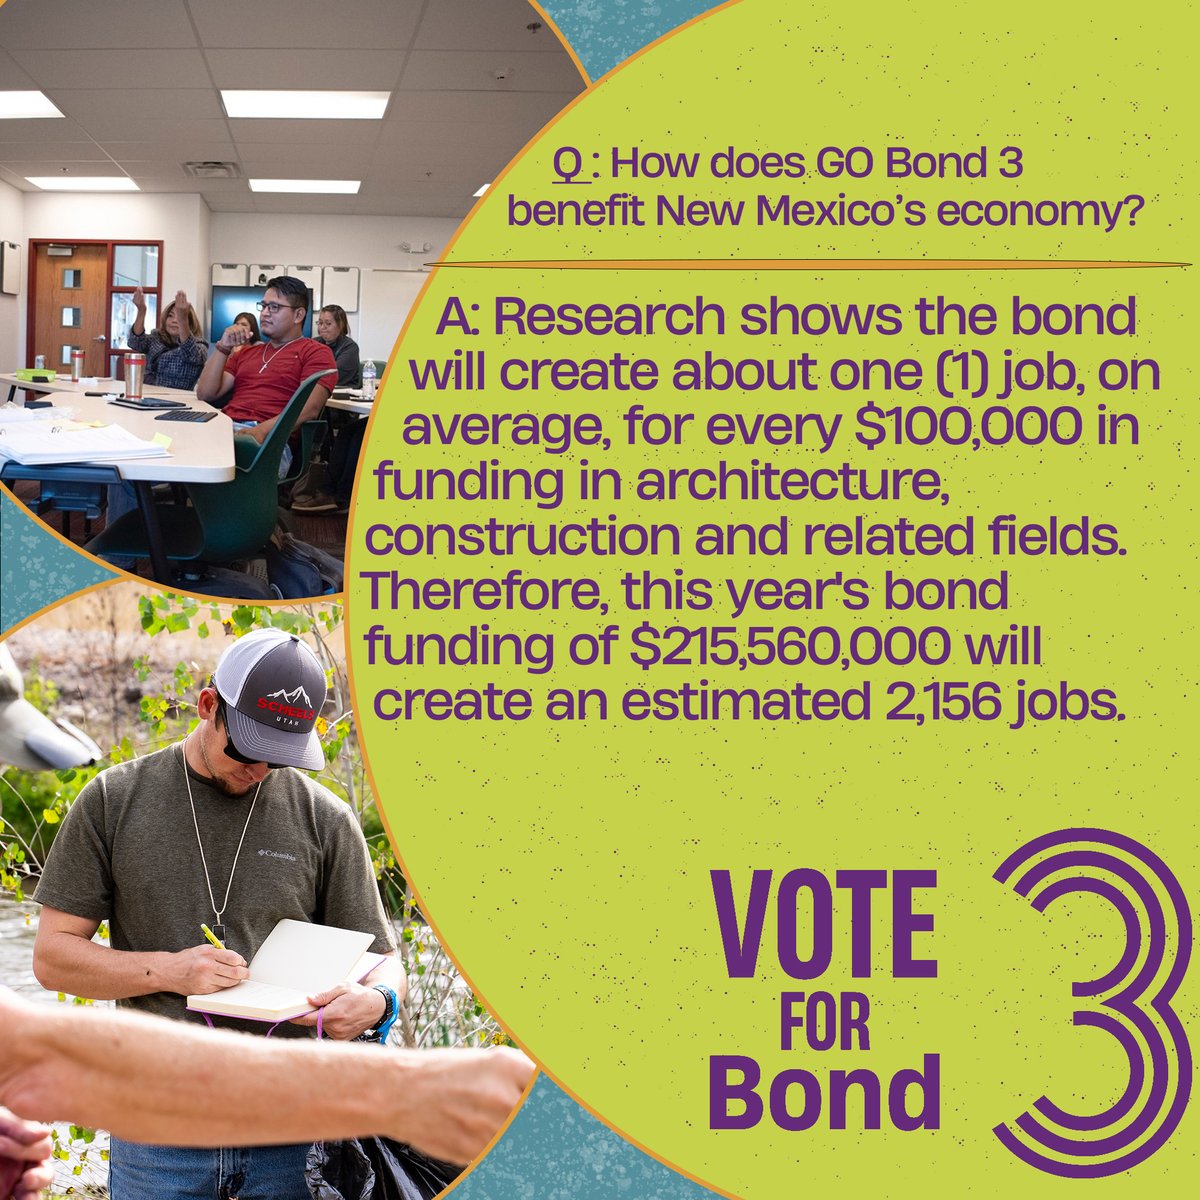 Not only will the GO Bond create jobs, those workers eat, stay and spend money in the communities in which projects are located, increasing gross receipts tax income and invigorating local economies. Visit our website below to learn more. 🔗 bond3fornm.com #Bond3ForNM